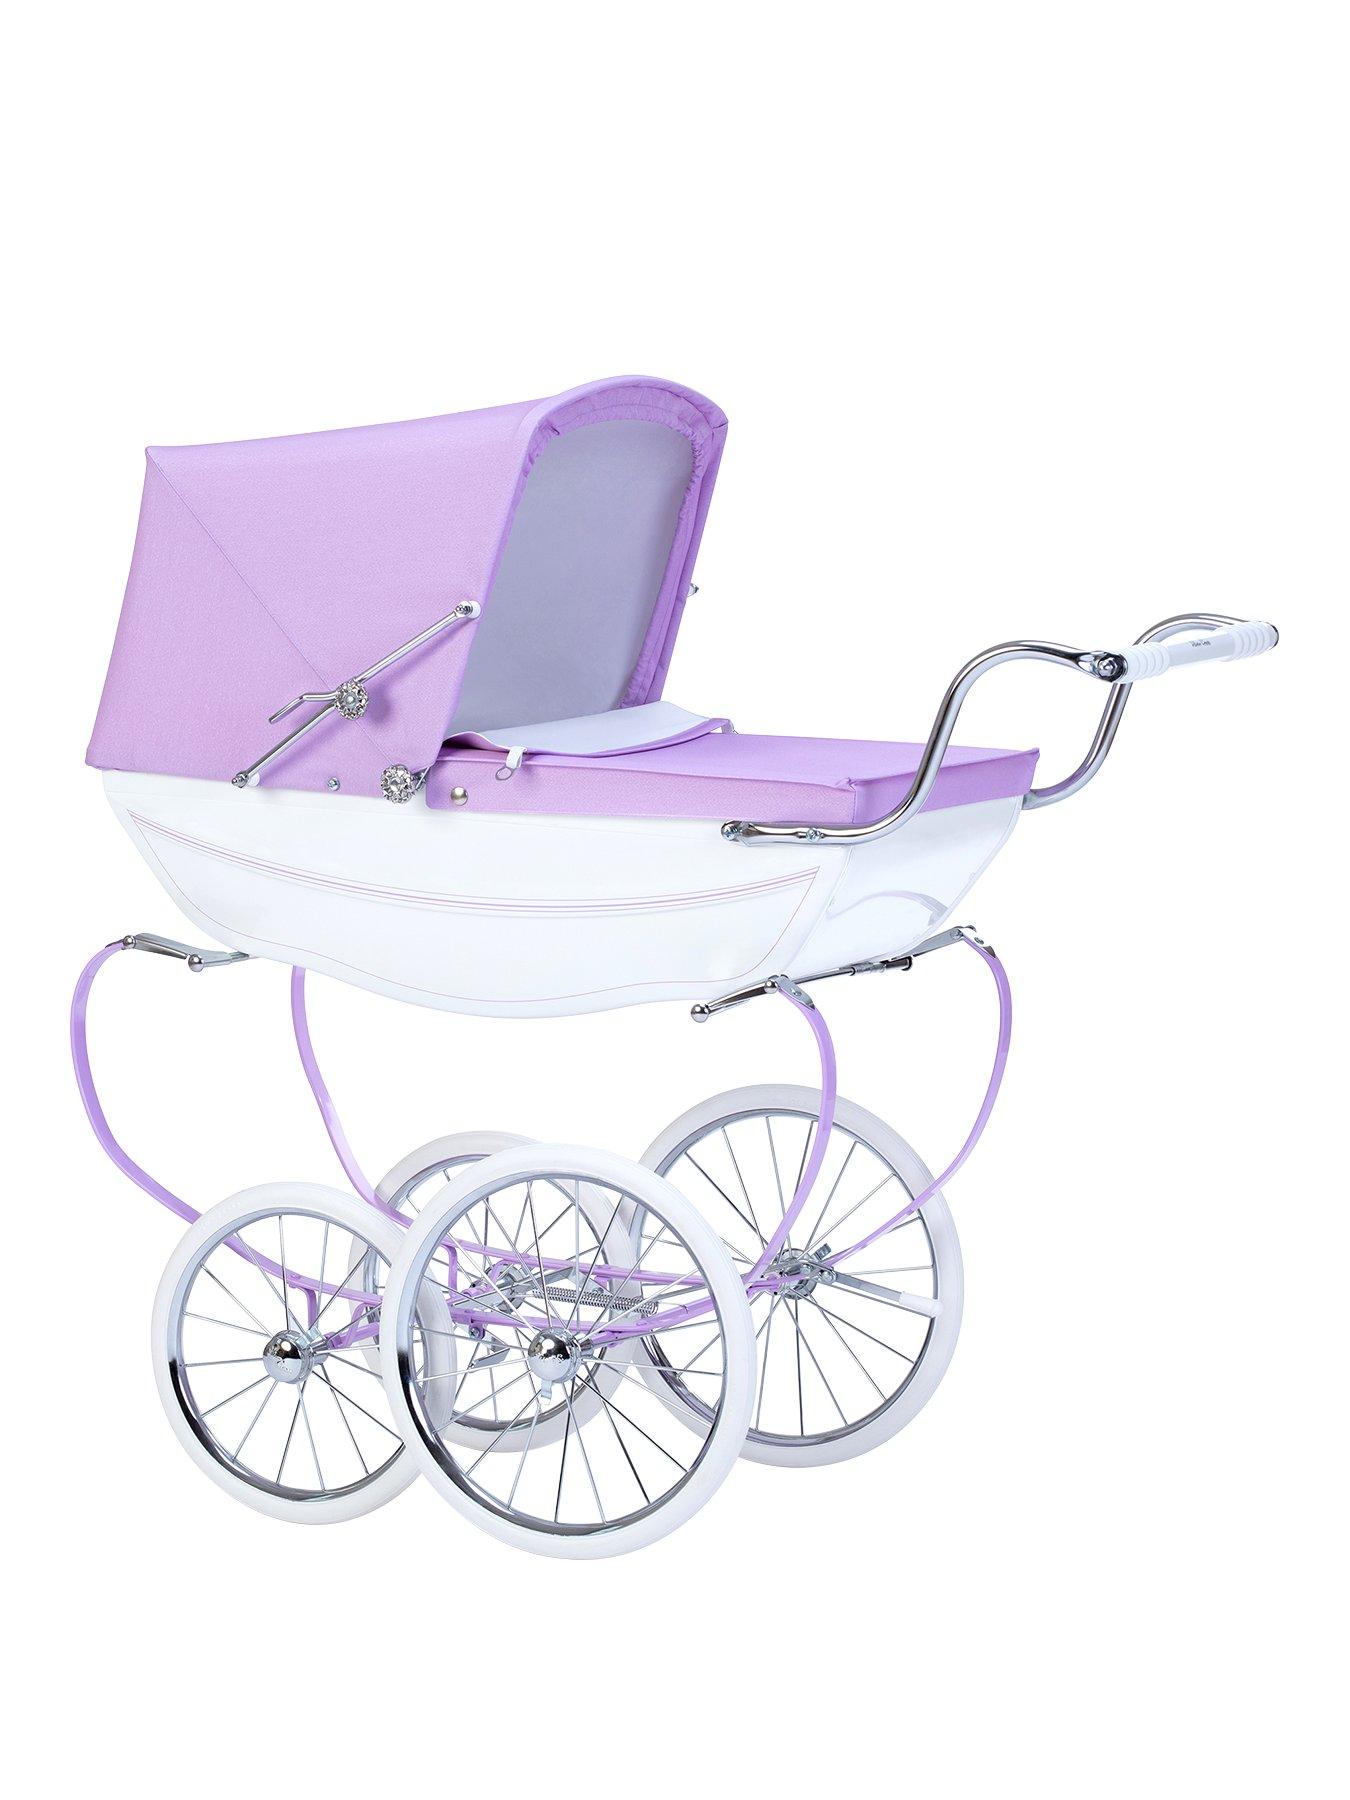 carriage pram for doll